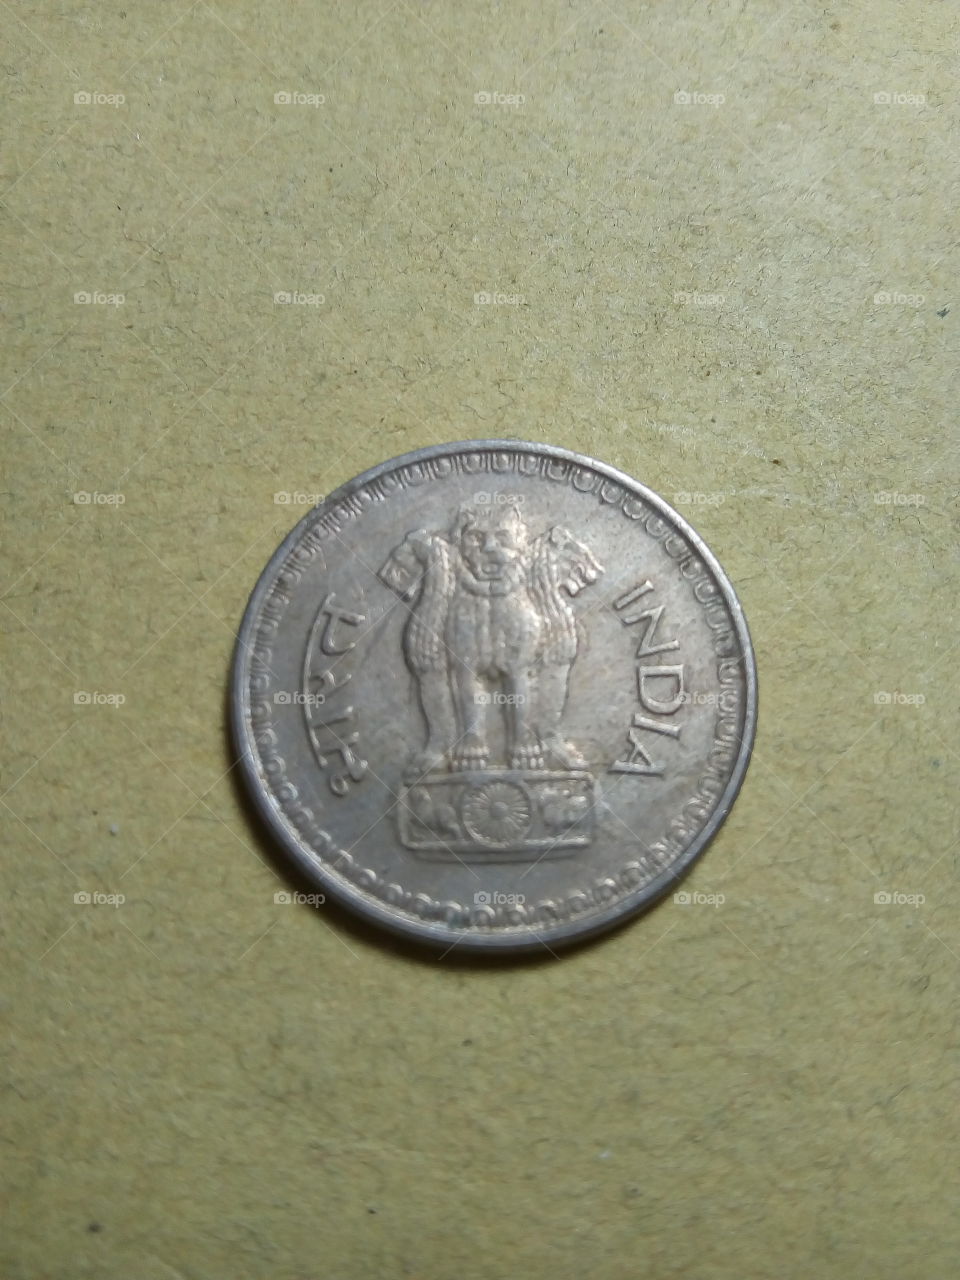 A coin of Twenty five paise- 1/4 share of Indian Rupee issued by Government of India in 1988.